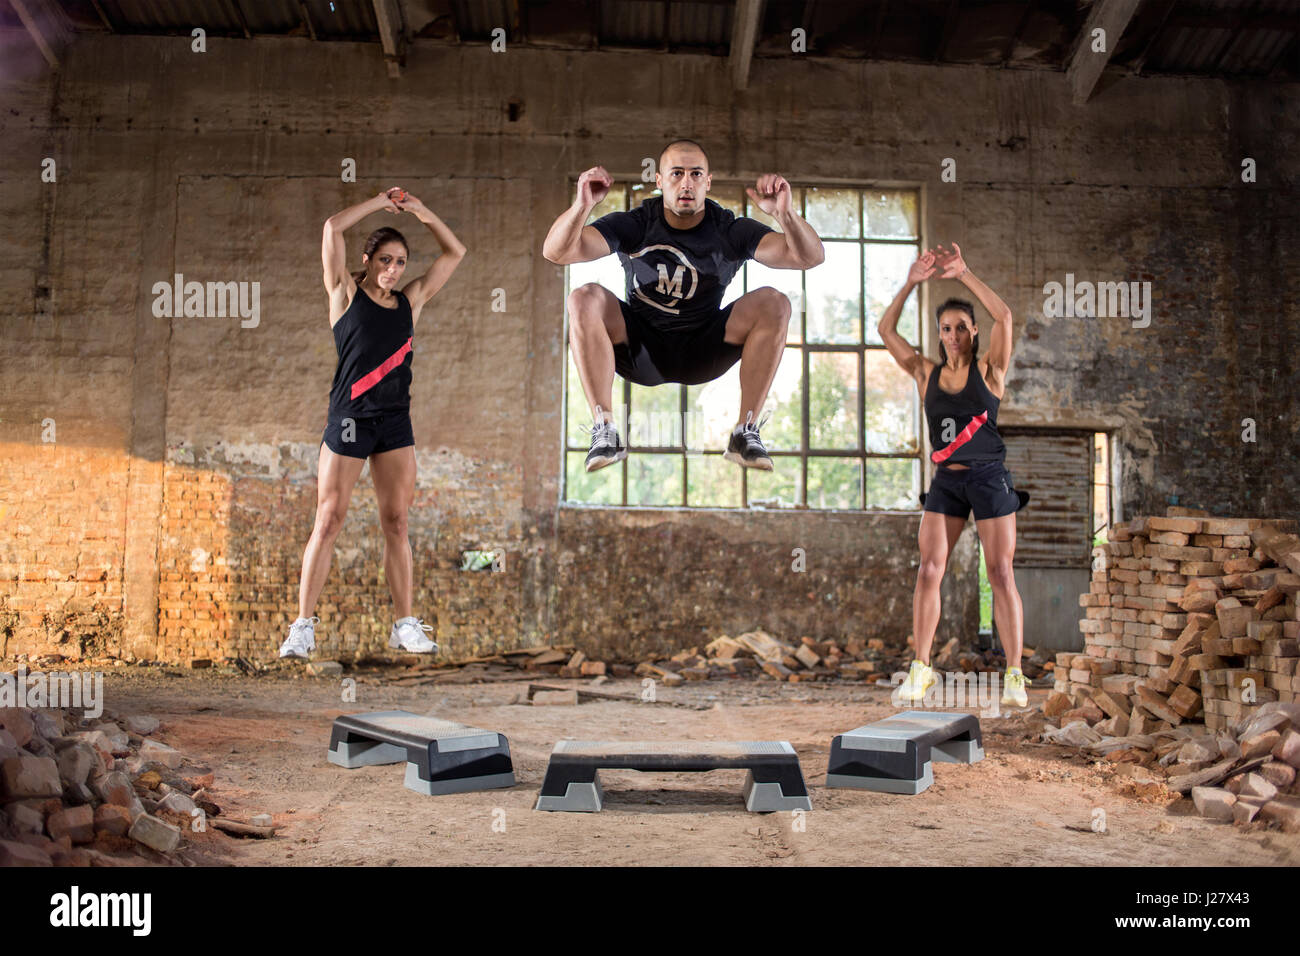 Young sport people jump off on their grit condition training in hangar Stock Photo